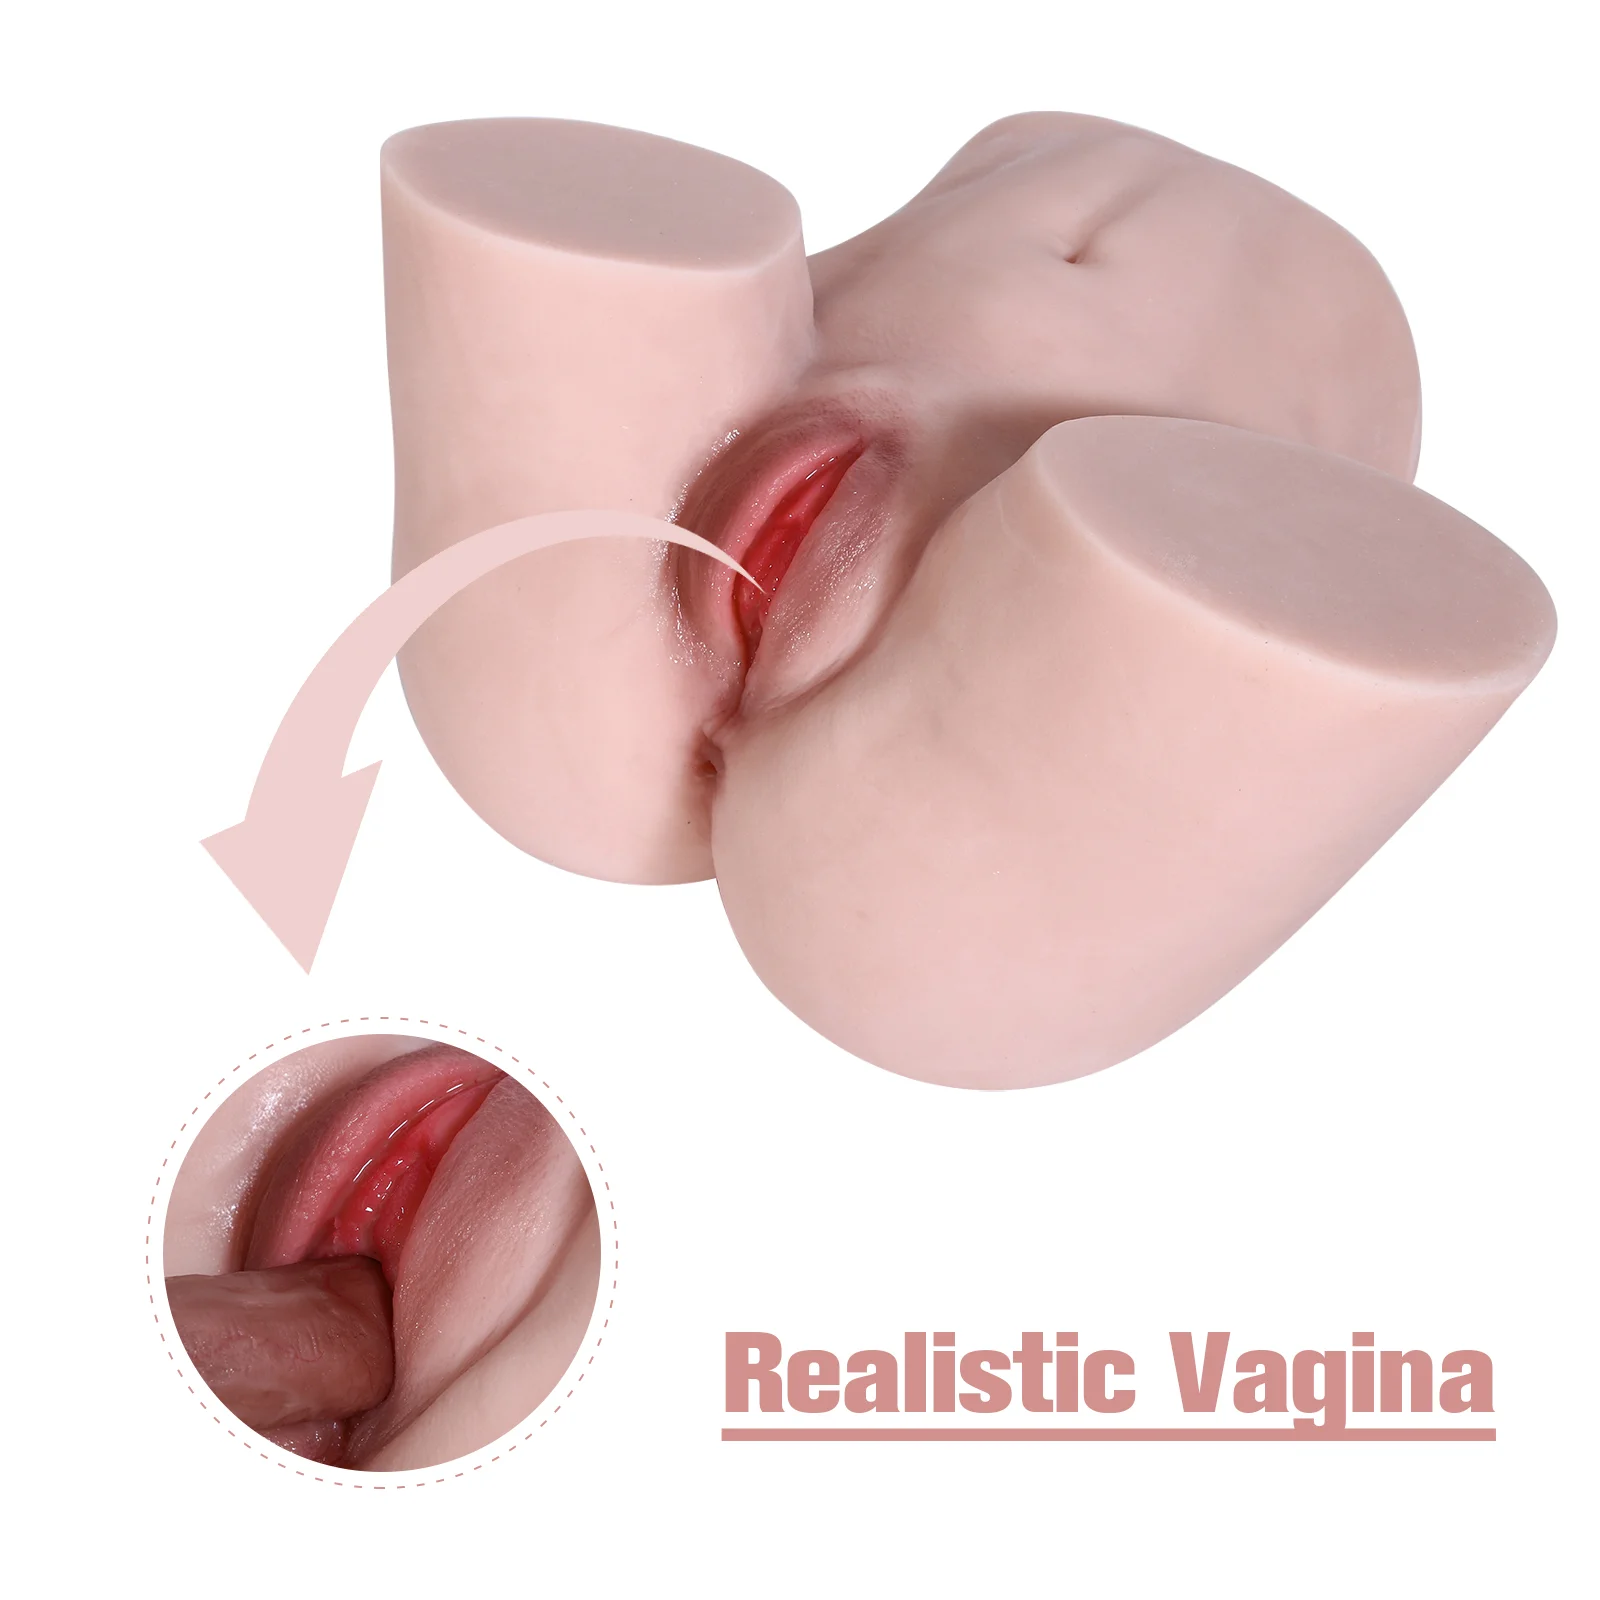 The penis is inserted into the ass torso of the vagina